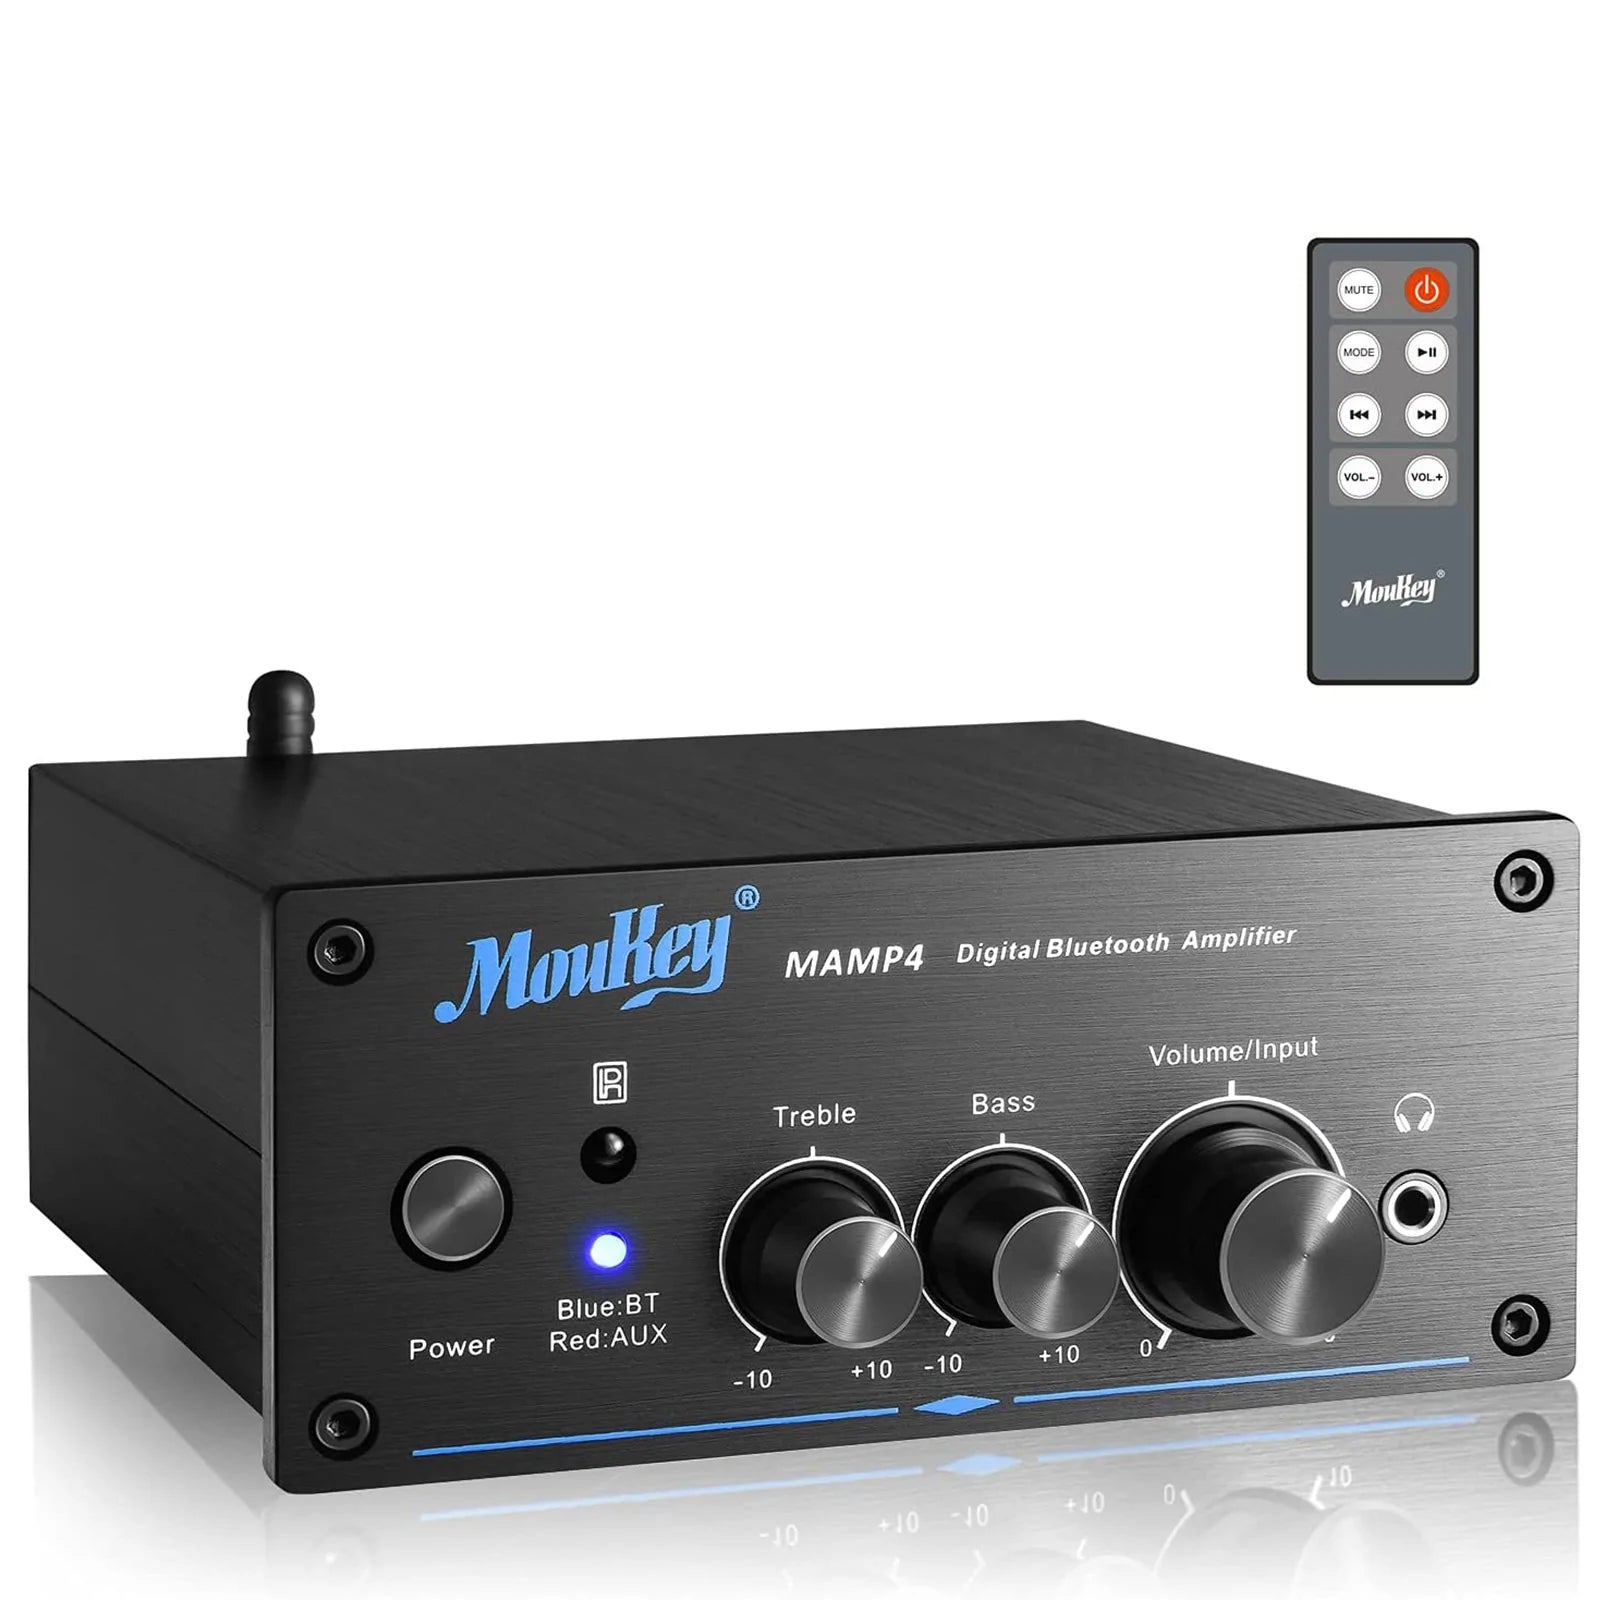 

Moukey MAMP4 Mini Amplifier Home Audio Receiver Bluetooth 5.0